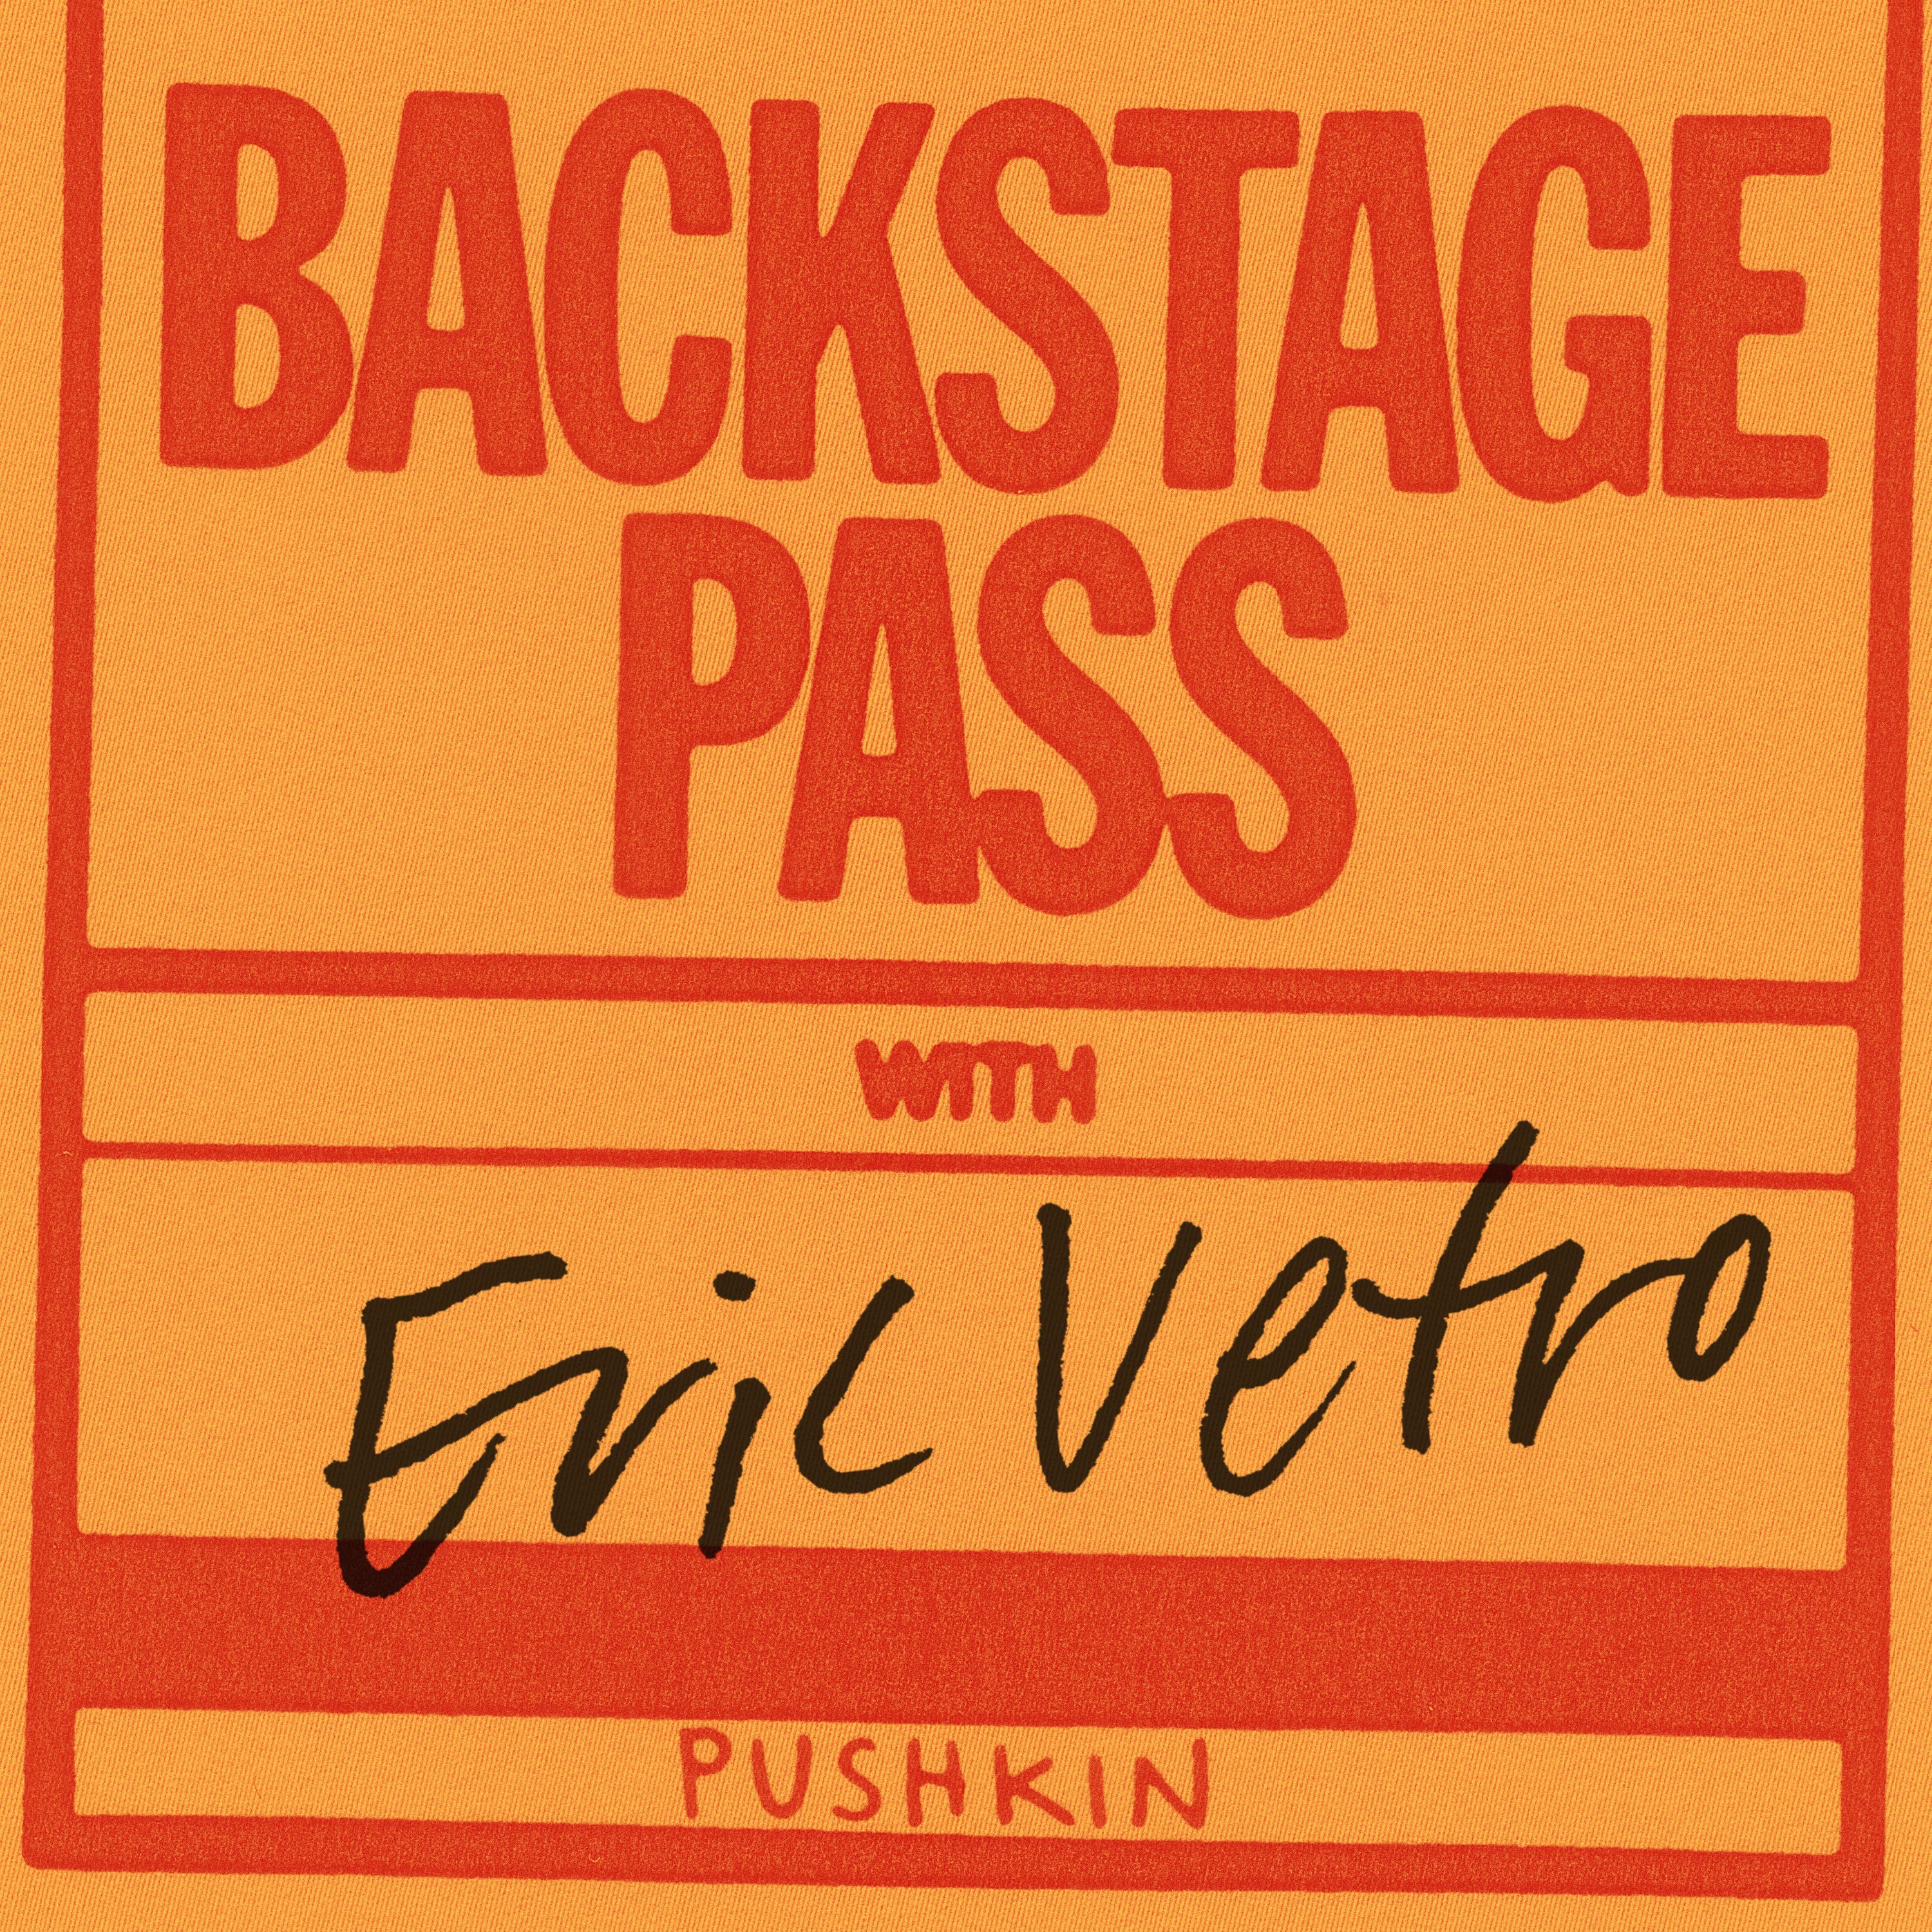 Introducing Backstage Pass with Eric Vetro